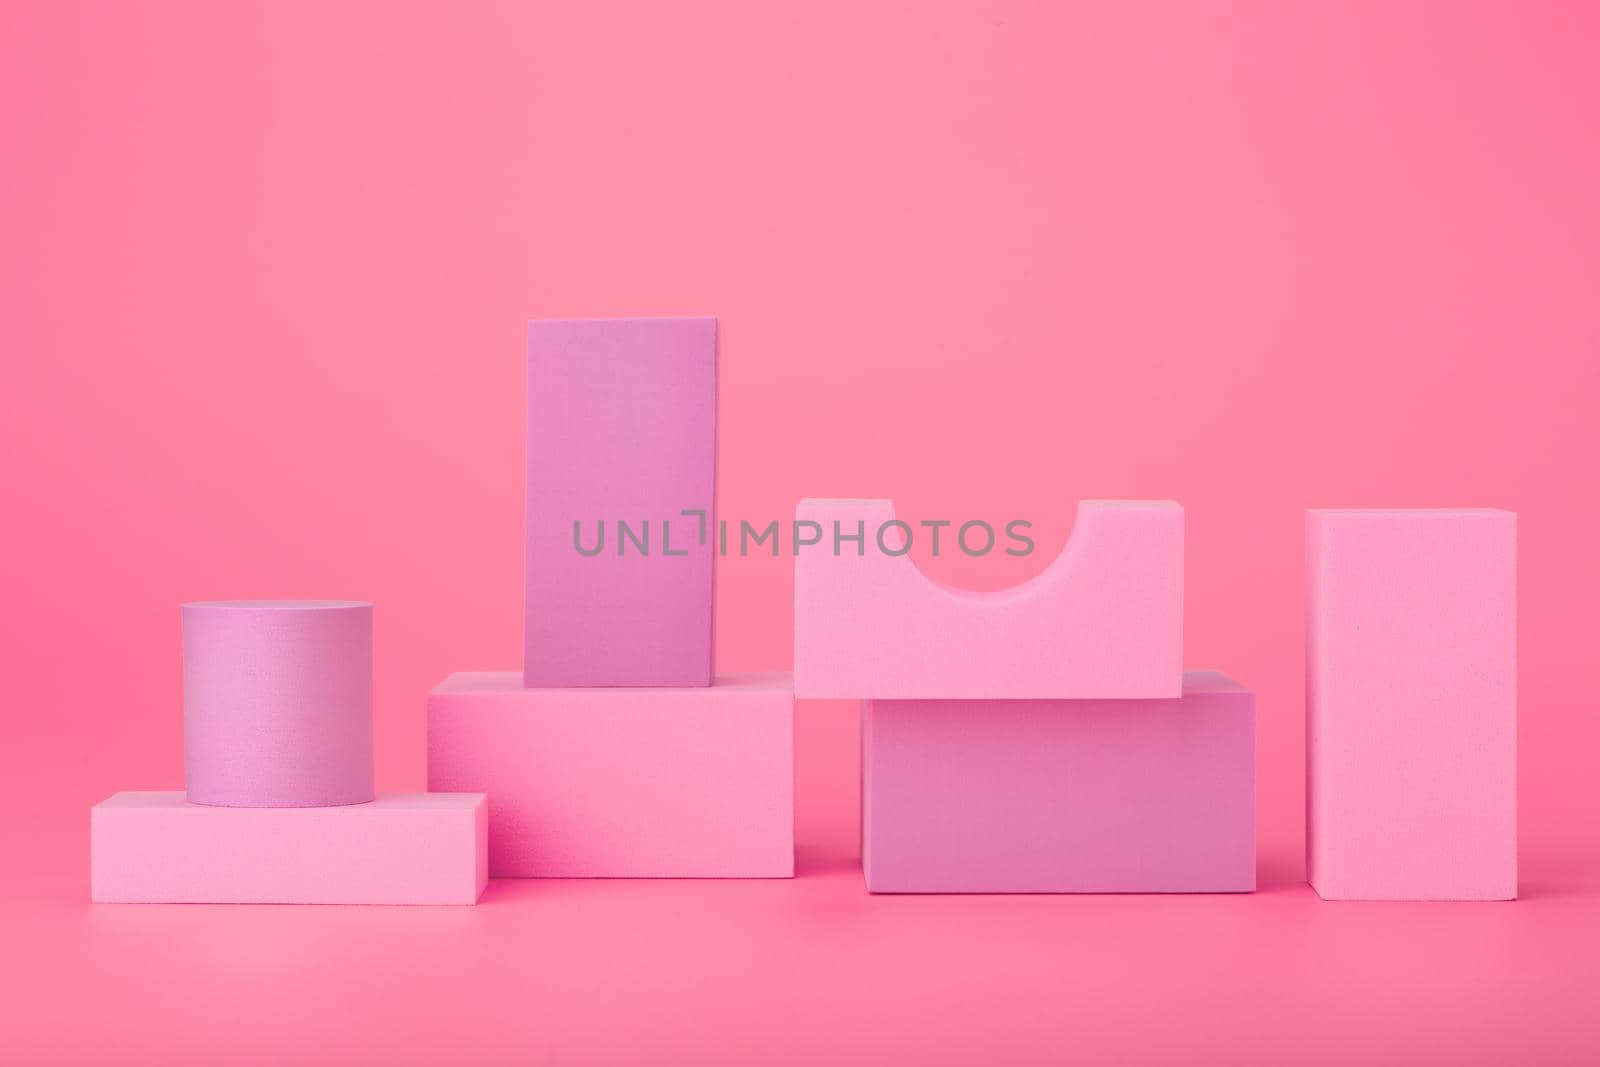 Abstract still life with pink and purple geometric figures, cylinder, rectangular and others against light pink background